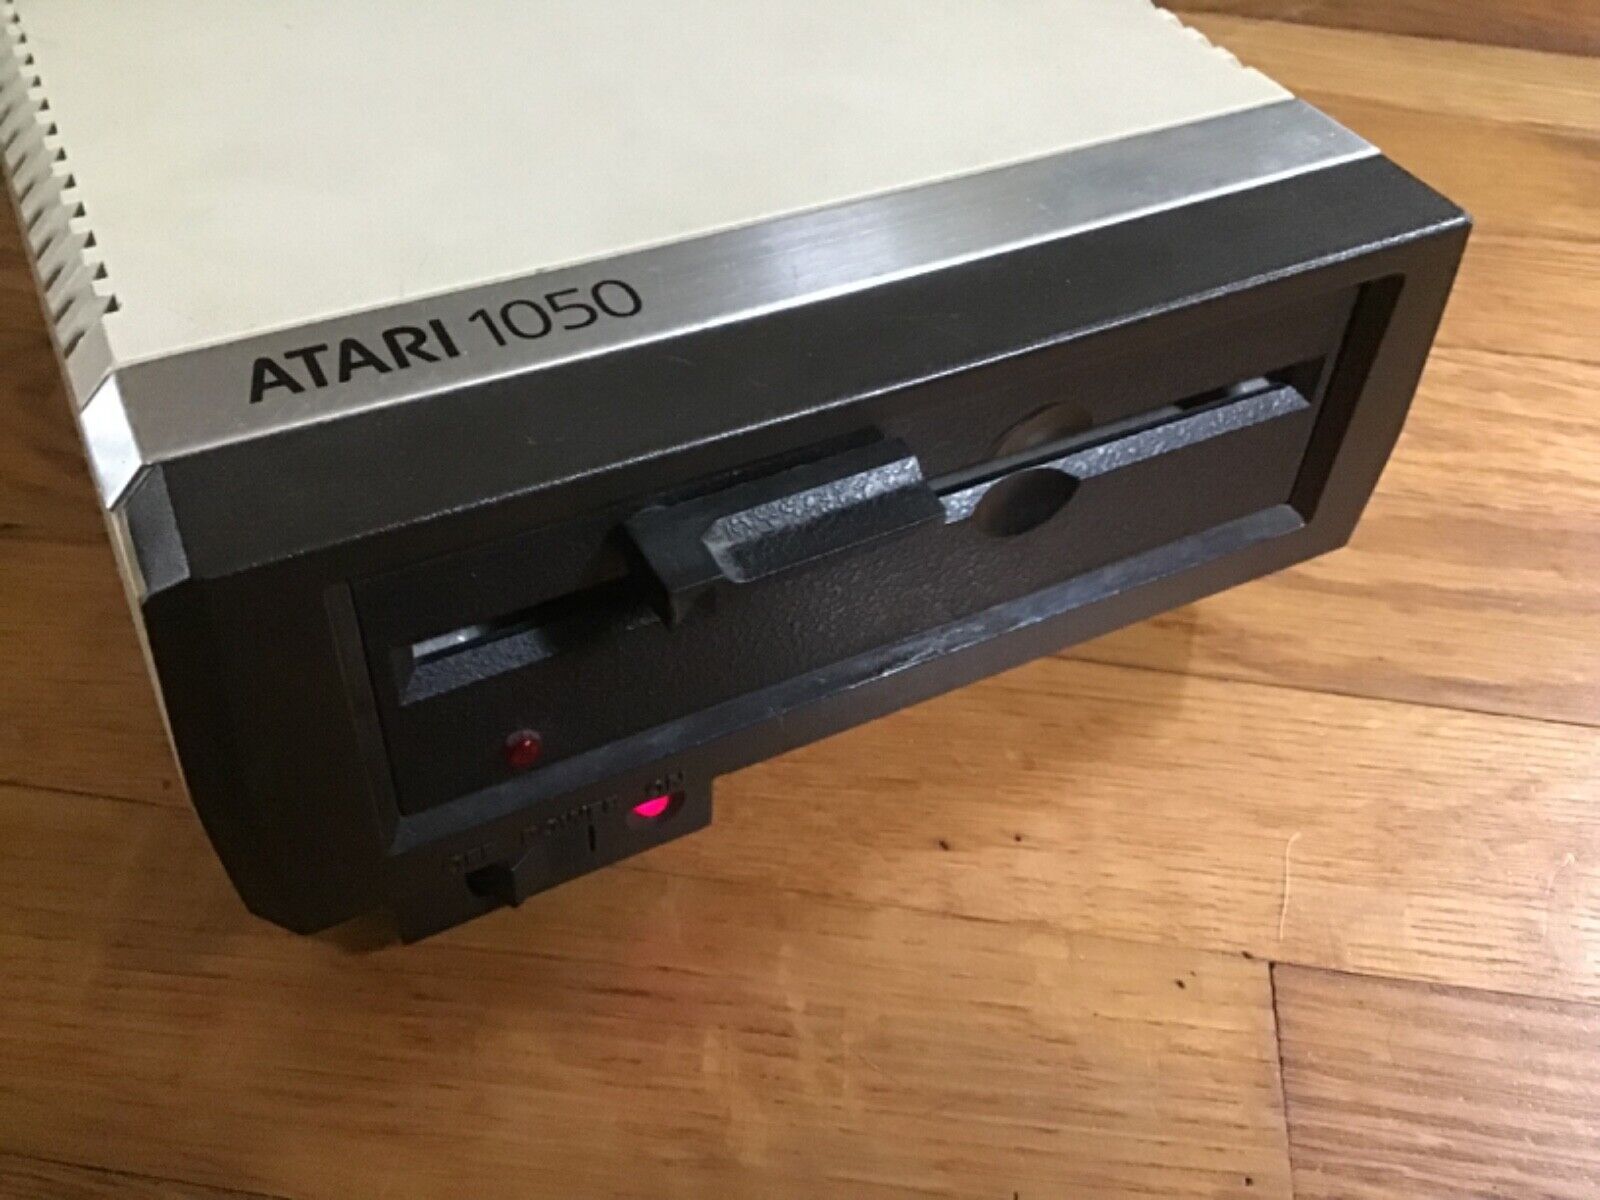 VINTAGE | ATARI 1050 5 1/4 FLOPPY DISK DRIVE WITH POWER SUPPLY - TESTED WORKING